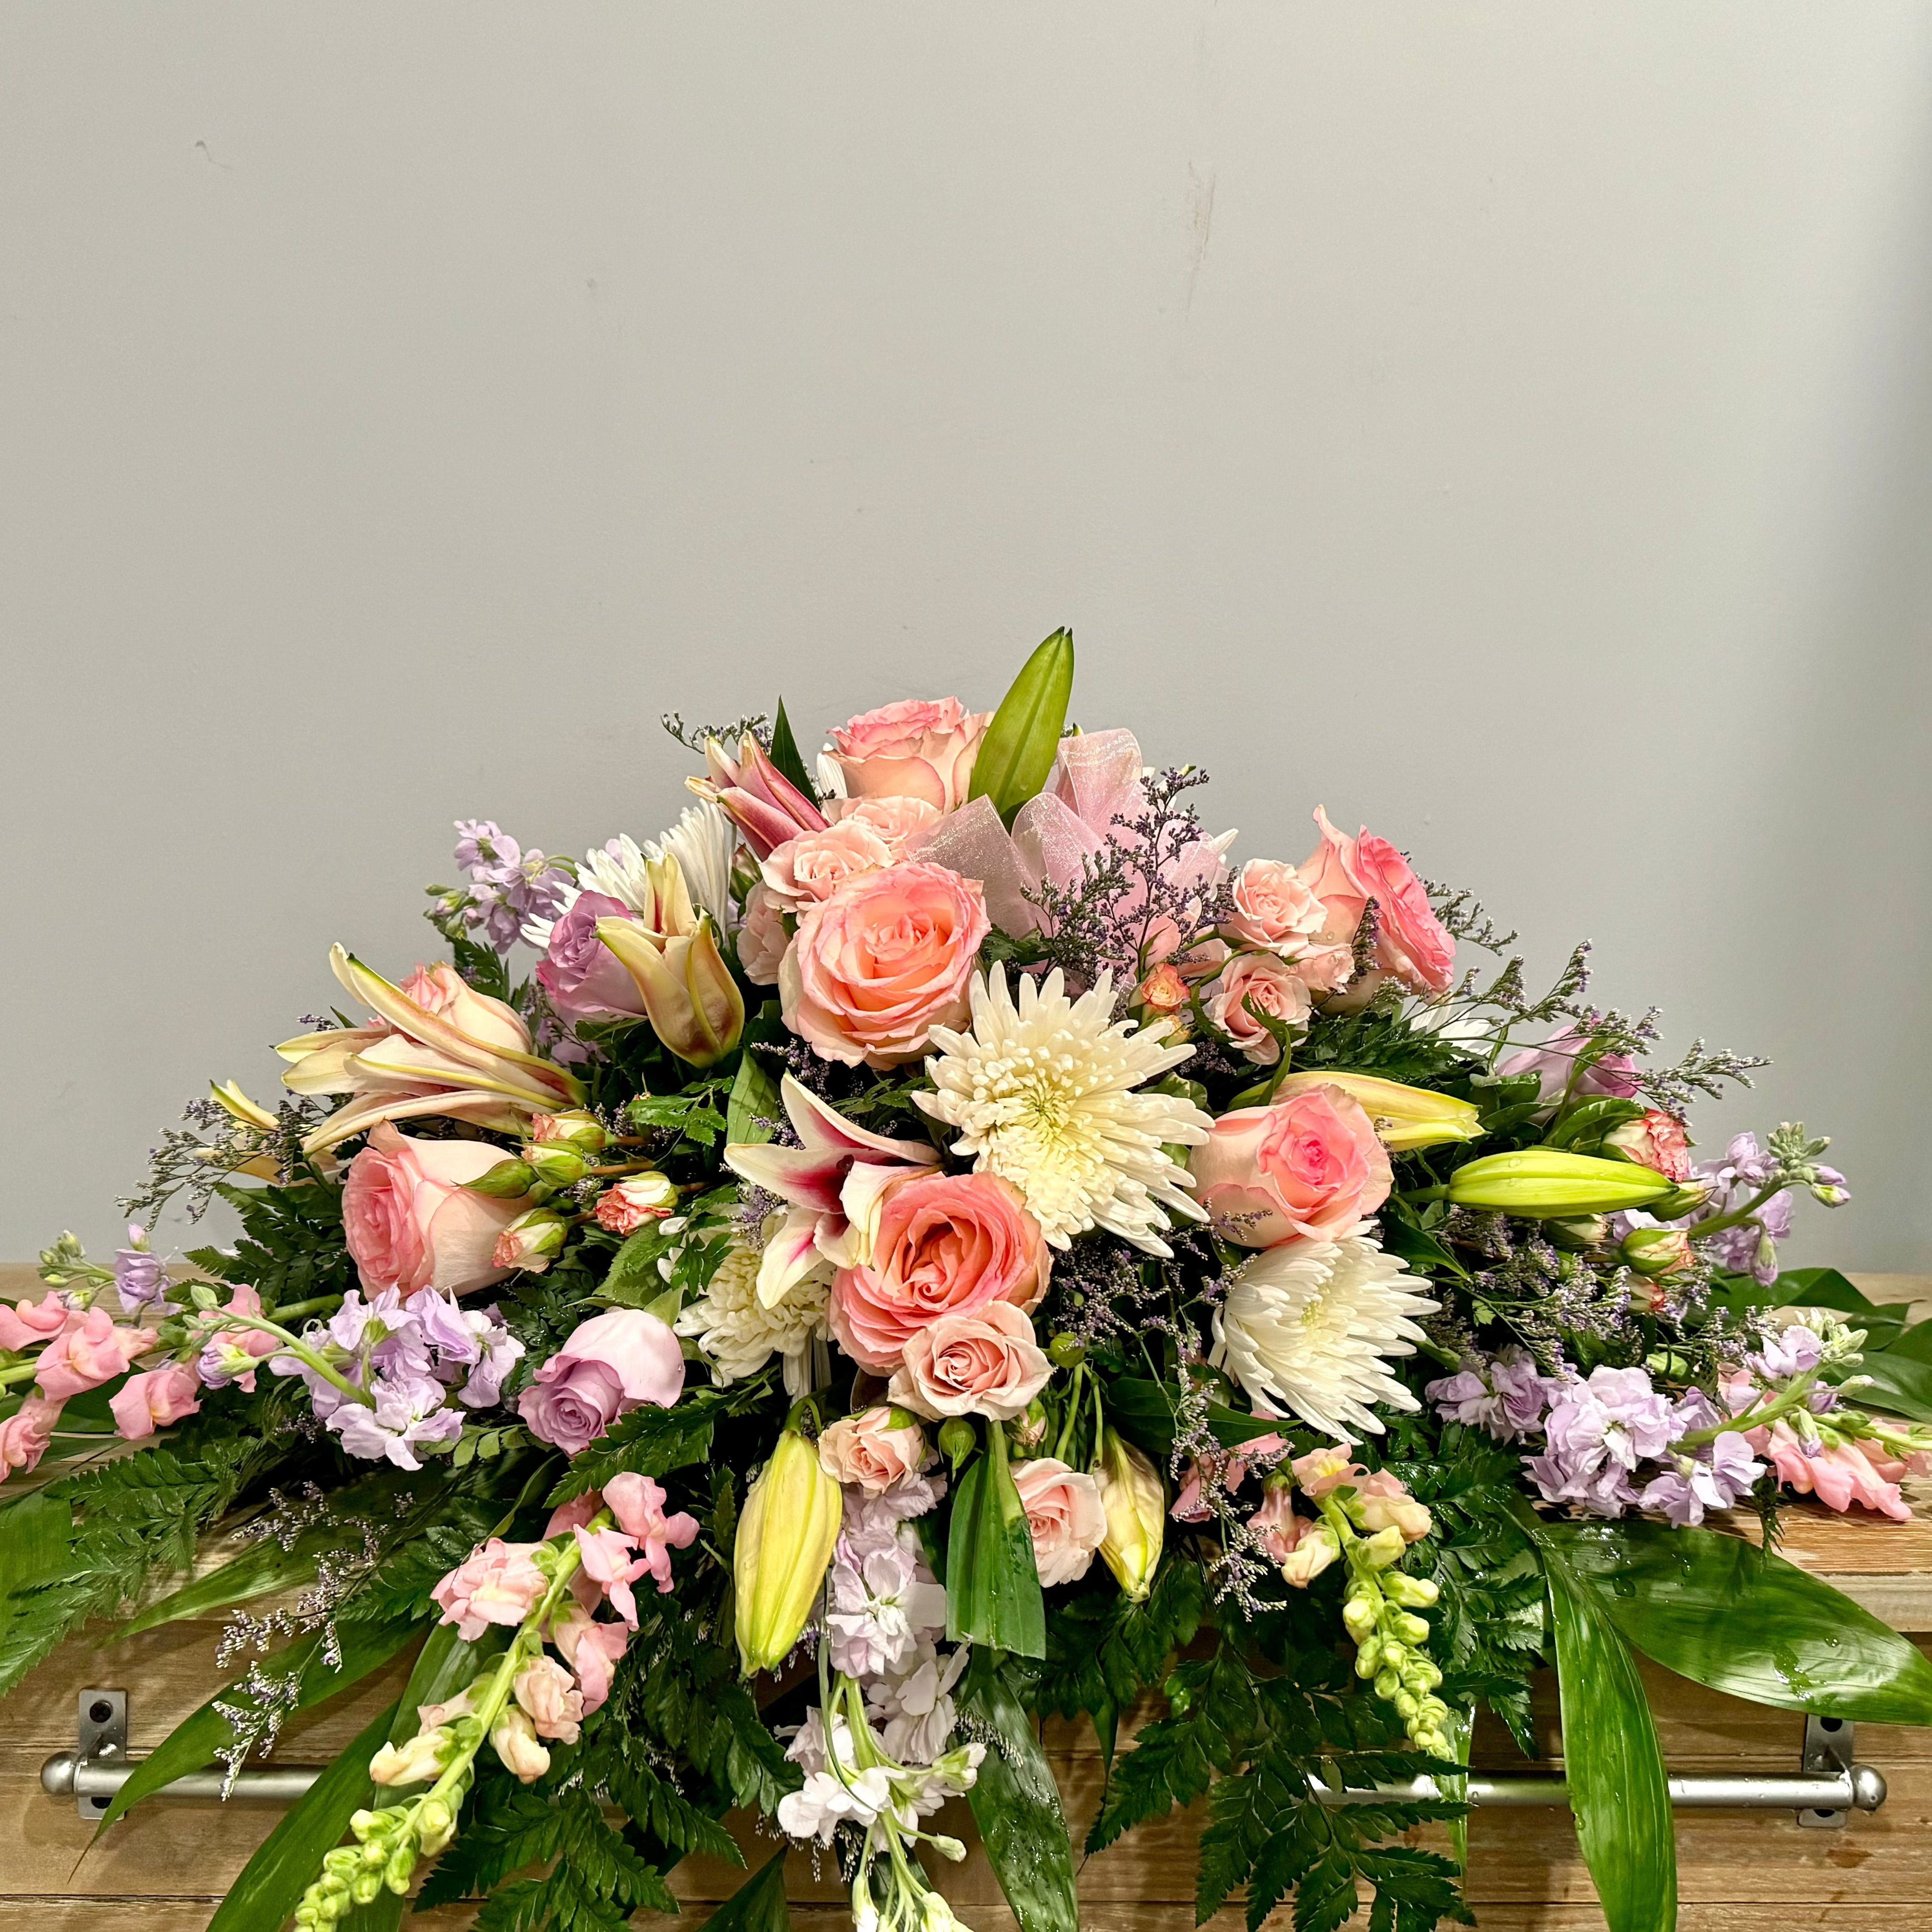 A light pink and white casket spray.